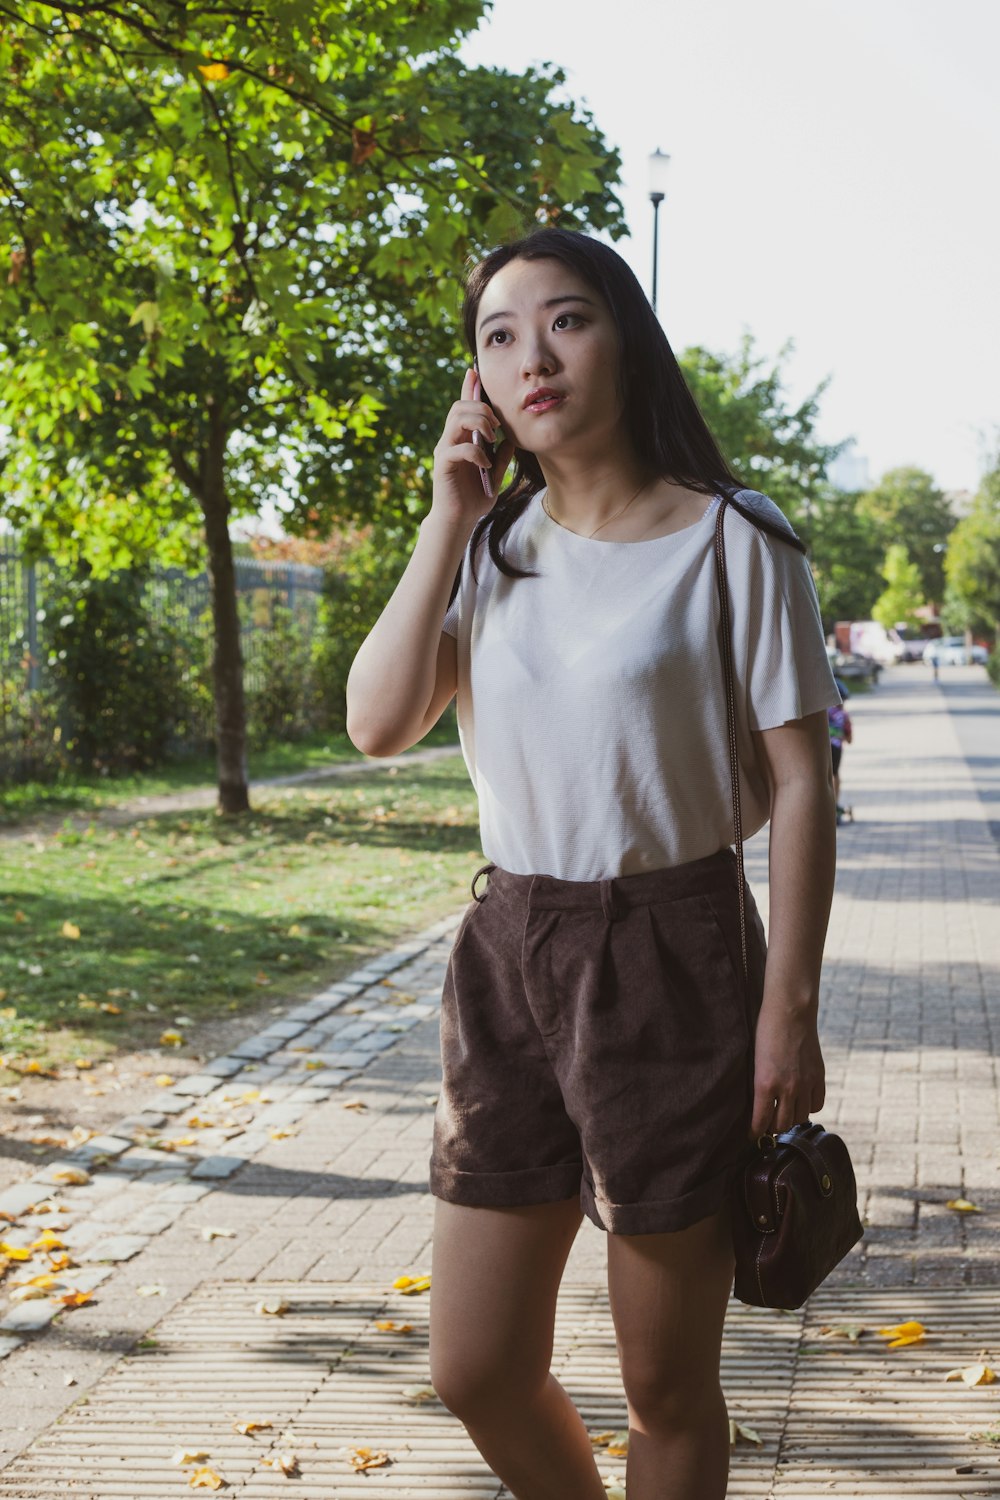 woman in white crew neck t-shirt and brown shorts standing on sidewalk during daytime